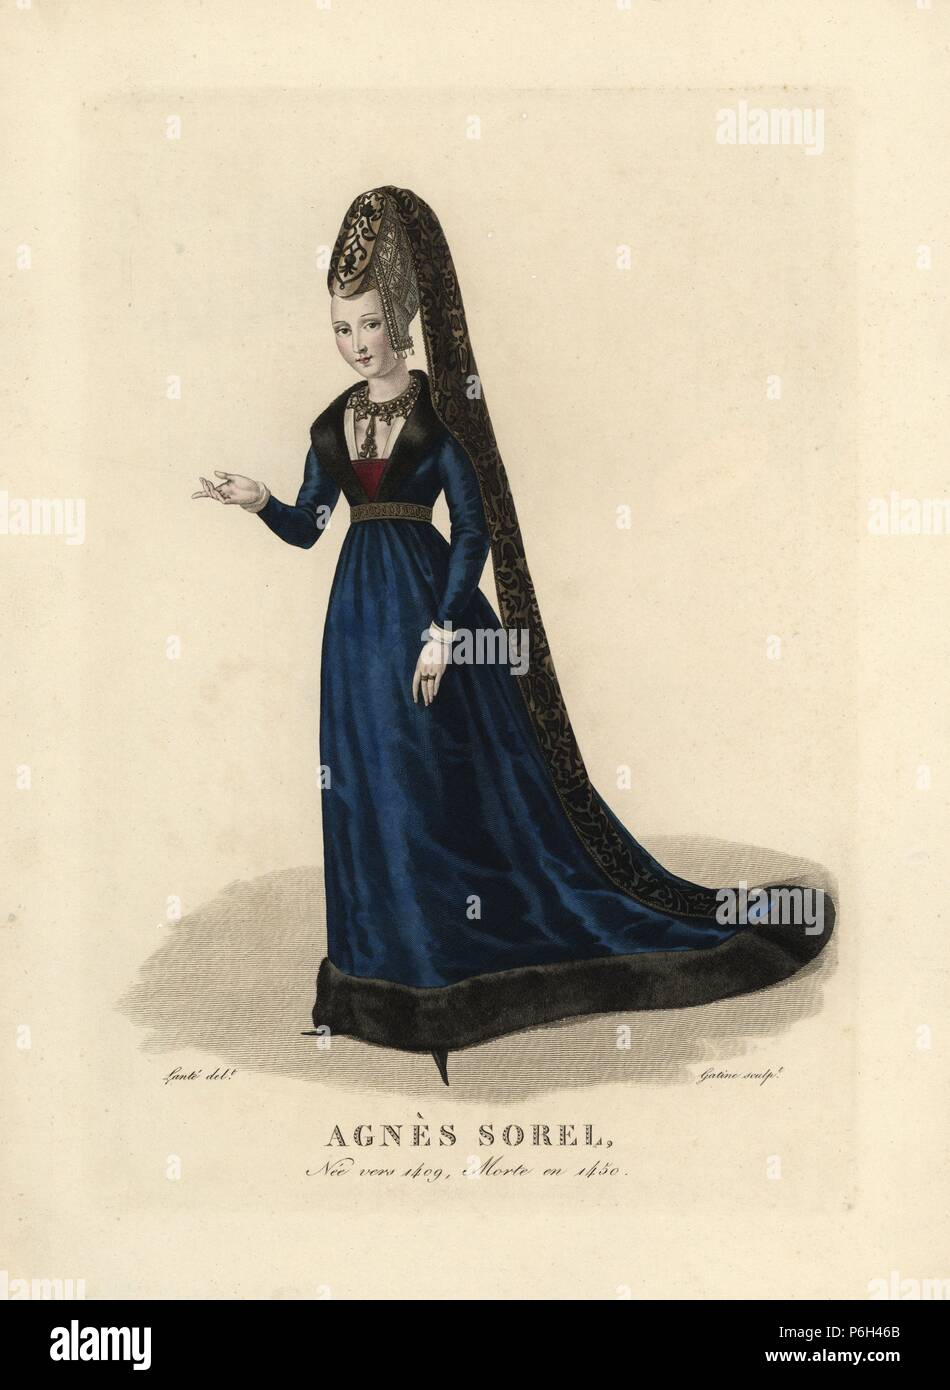 Agnes Sorel, mistress of King Charles VII of France, c.1409-1450. Handcoloured copperplate engraving by Gatine after an illustration by Louis Marie Lante from Pierre de la Mesangere's 'Costumes des femmes celebres' (Costumes of Famous Women), Paris, 1827. Stock Photo